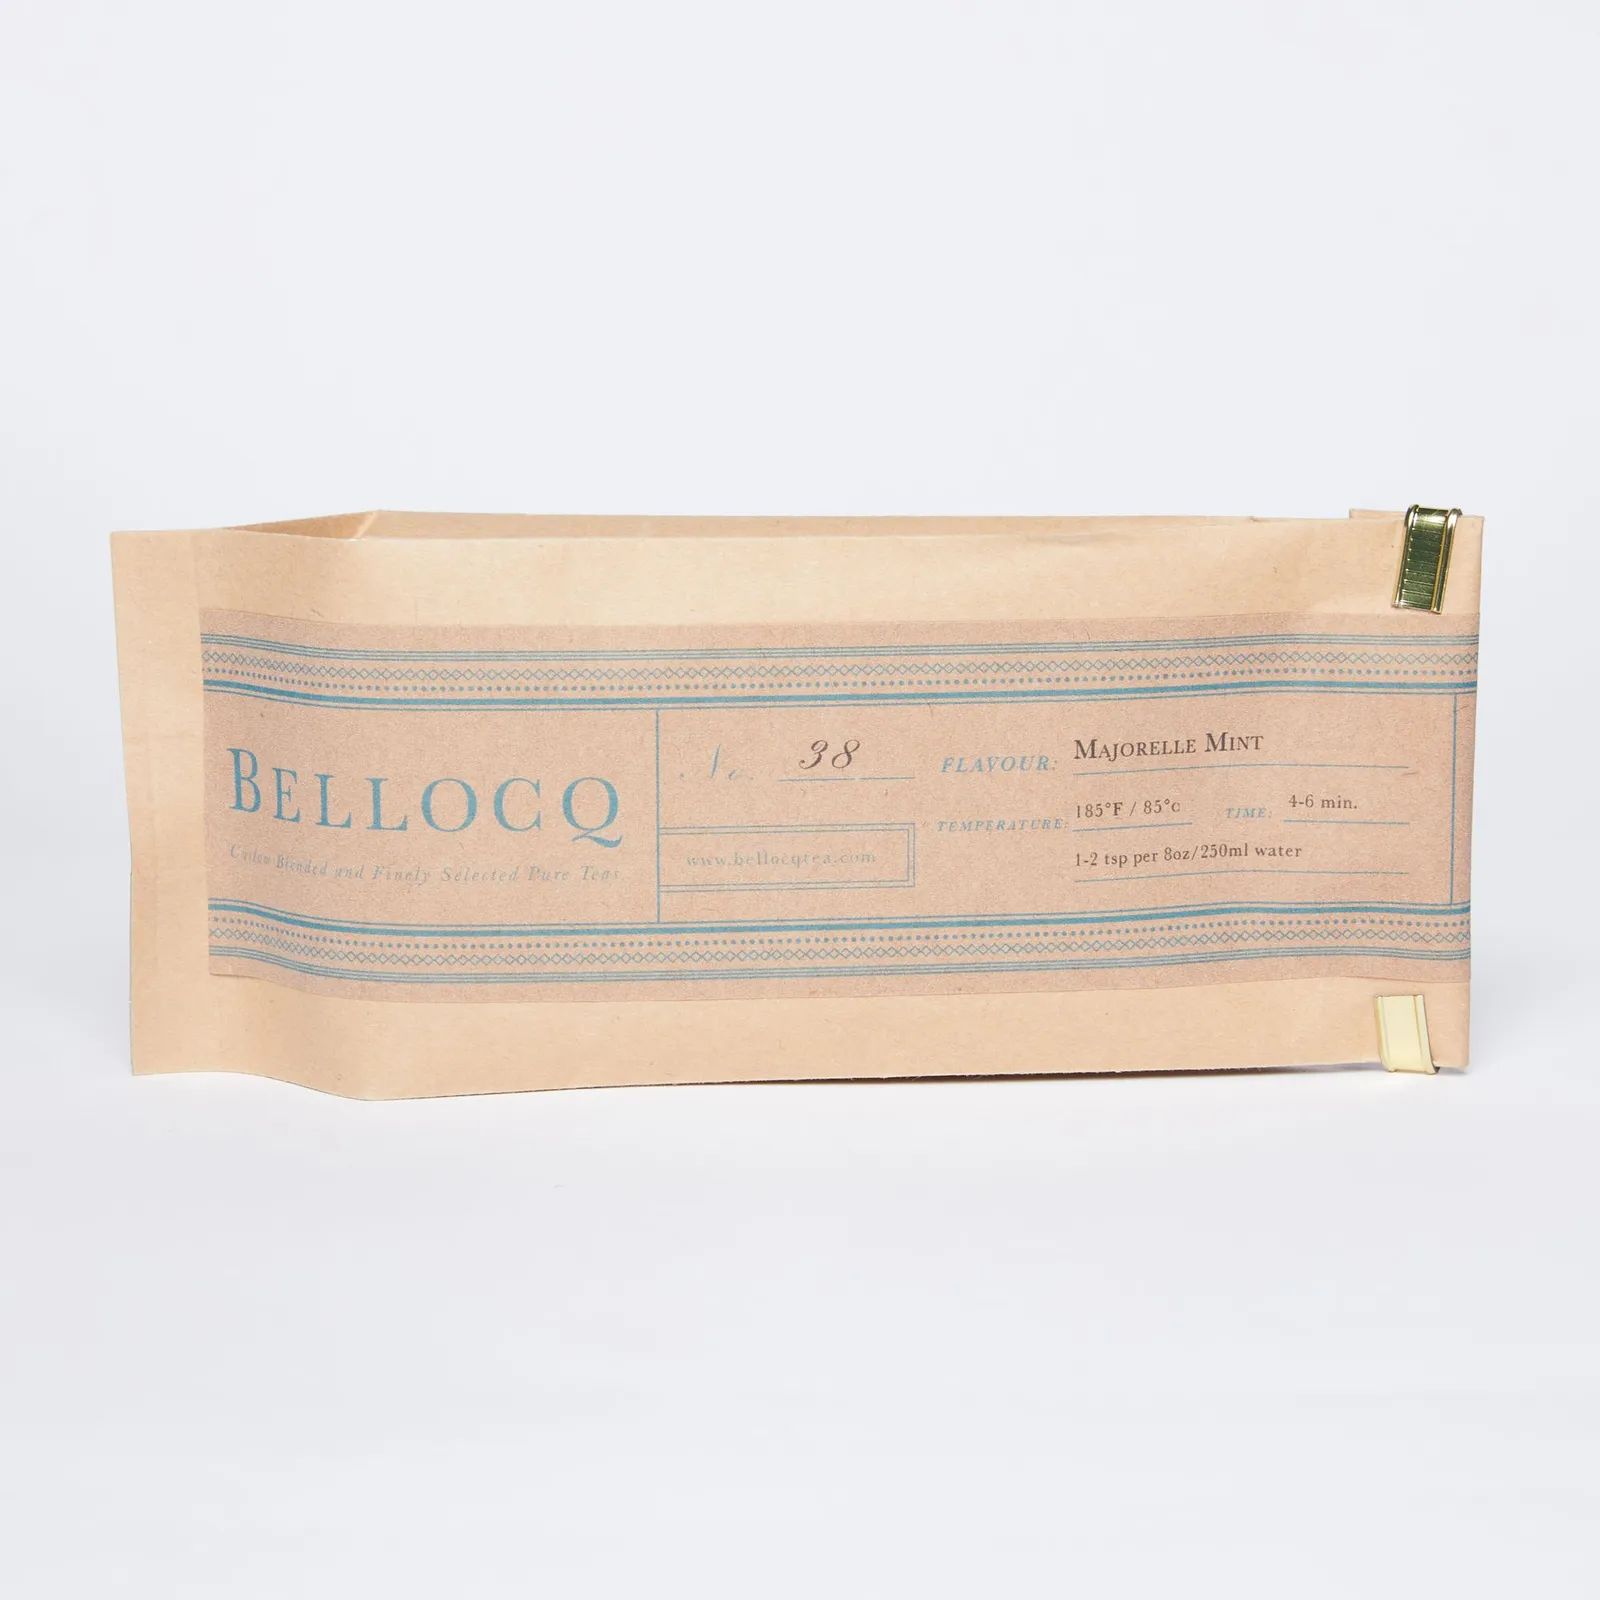 A tan bag of tea with delicate blue text and design